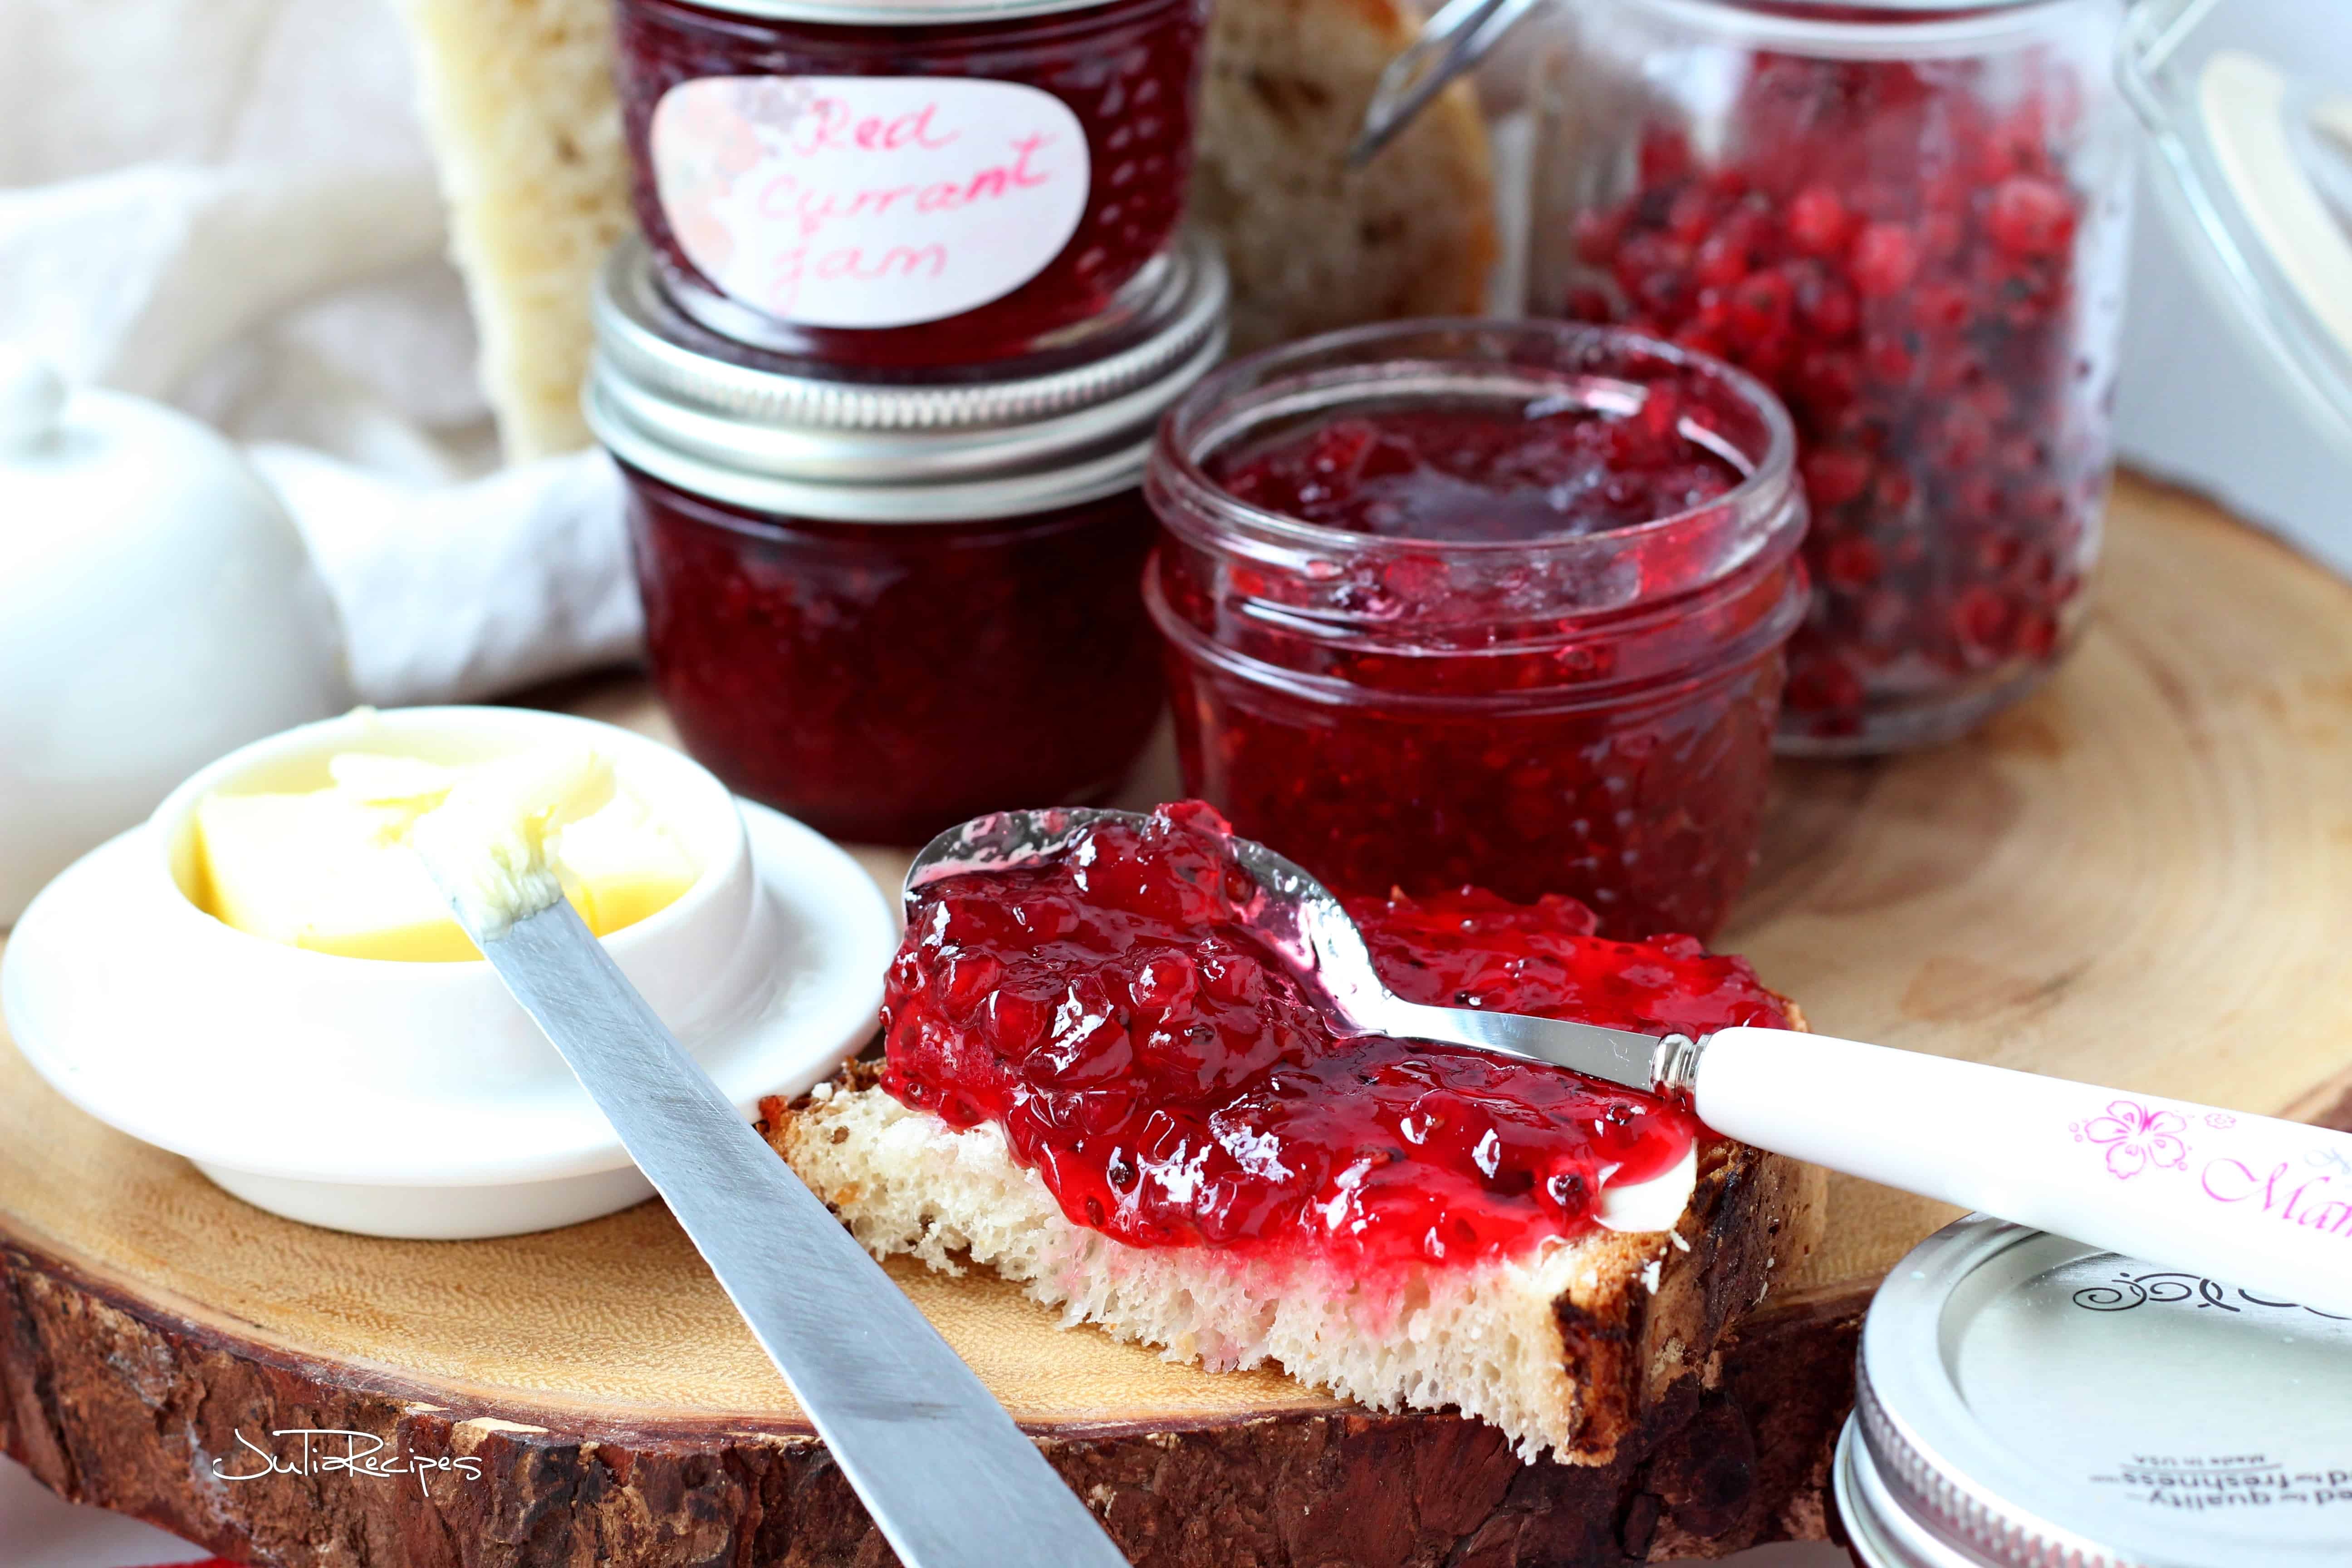 HOMEMADE RED CURRANT JAM